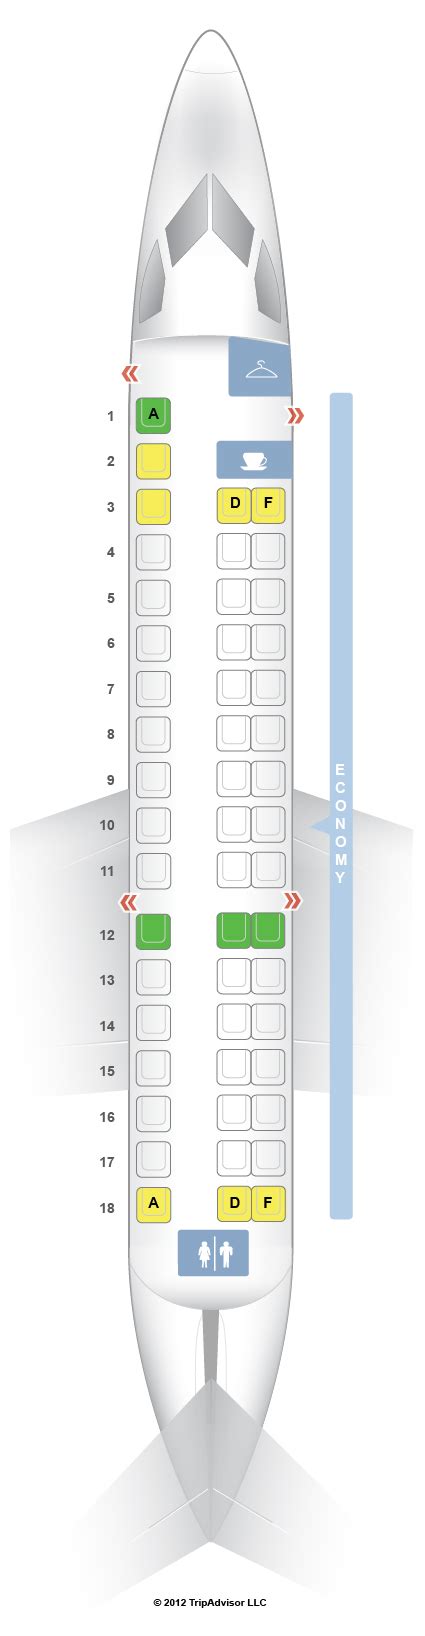 Erj 145 seat map. Economy. Seats 50. Pitch 31". Width 17". Recline 3". Fastjet Zimbabwe's economy class on the Embraer ERJ 145 offers travelers a blend of value and essential comforts. With seating for 50, it provides basic amenities and a selection of entertainment choices. The dedicated crew works diligently to ensure a pleasant flight experience for all. 